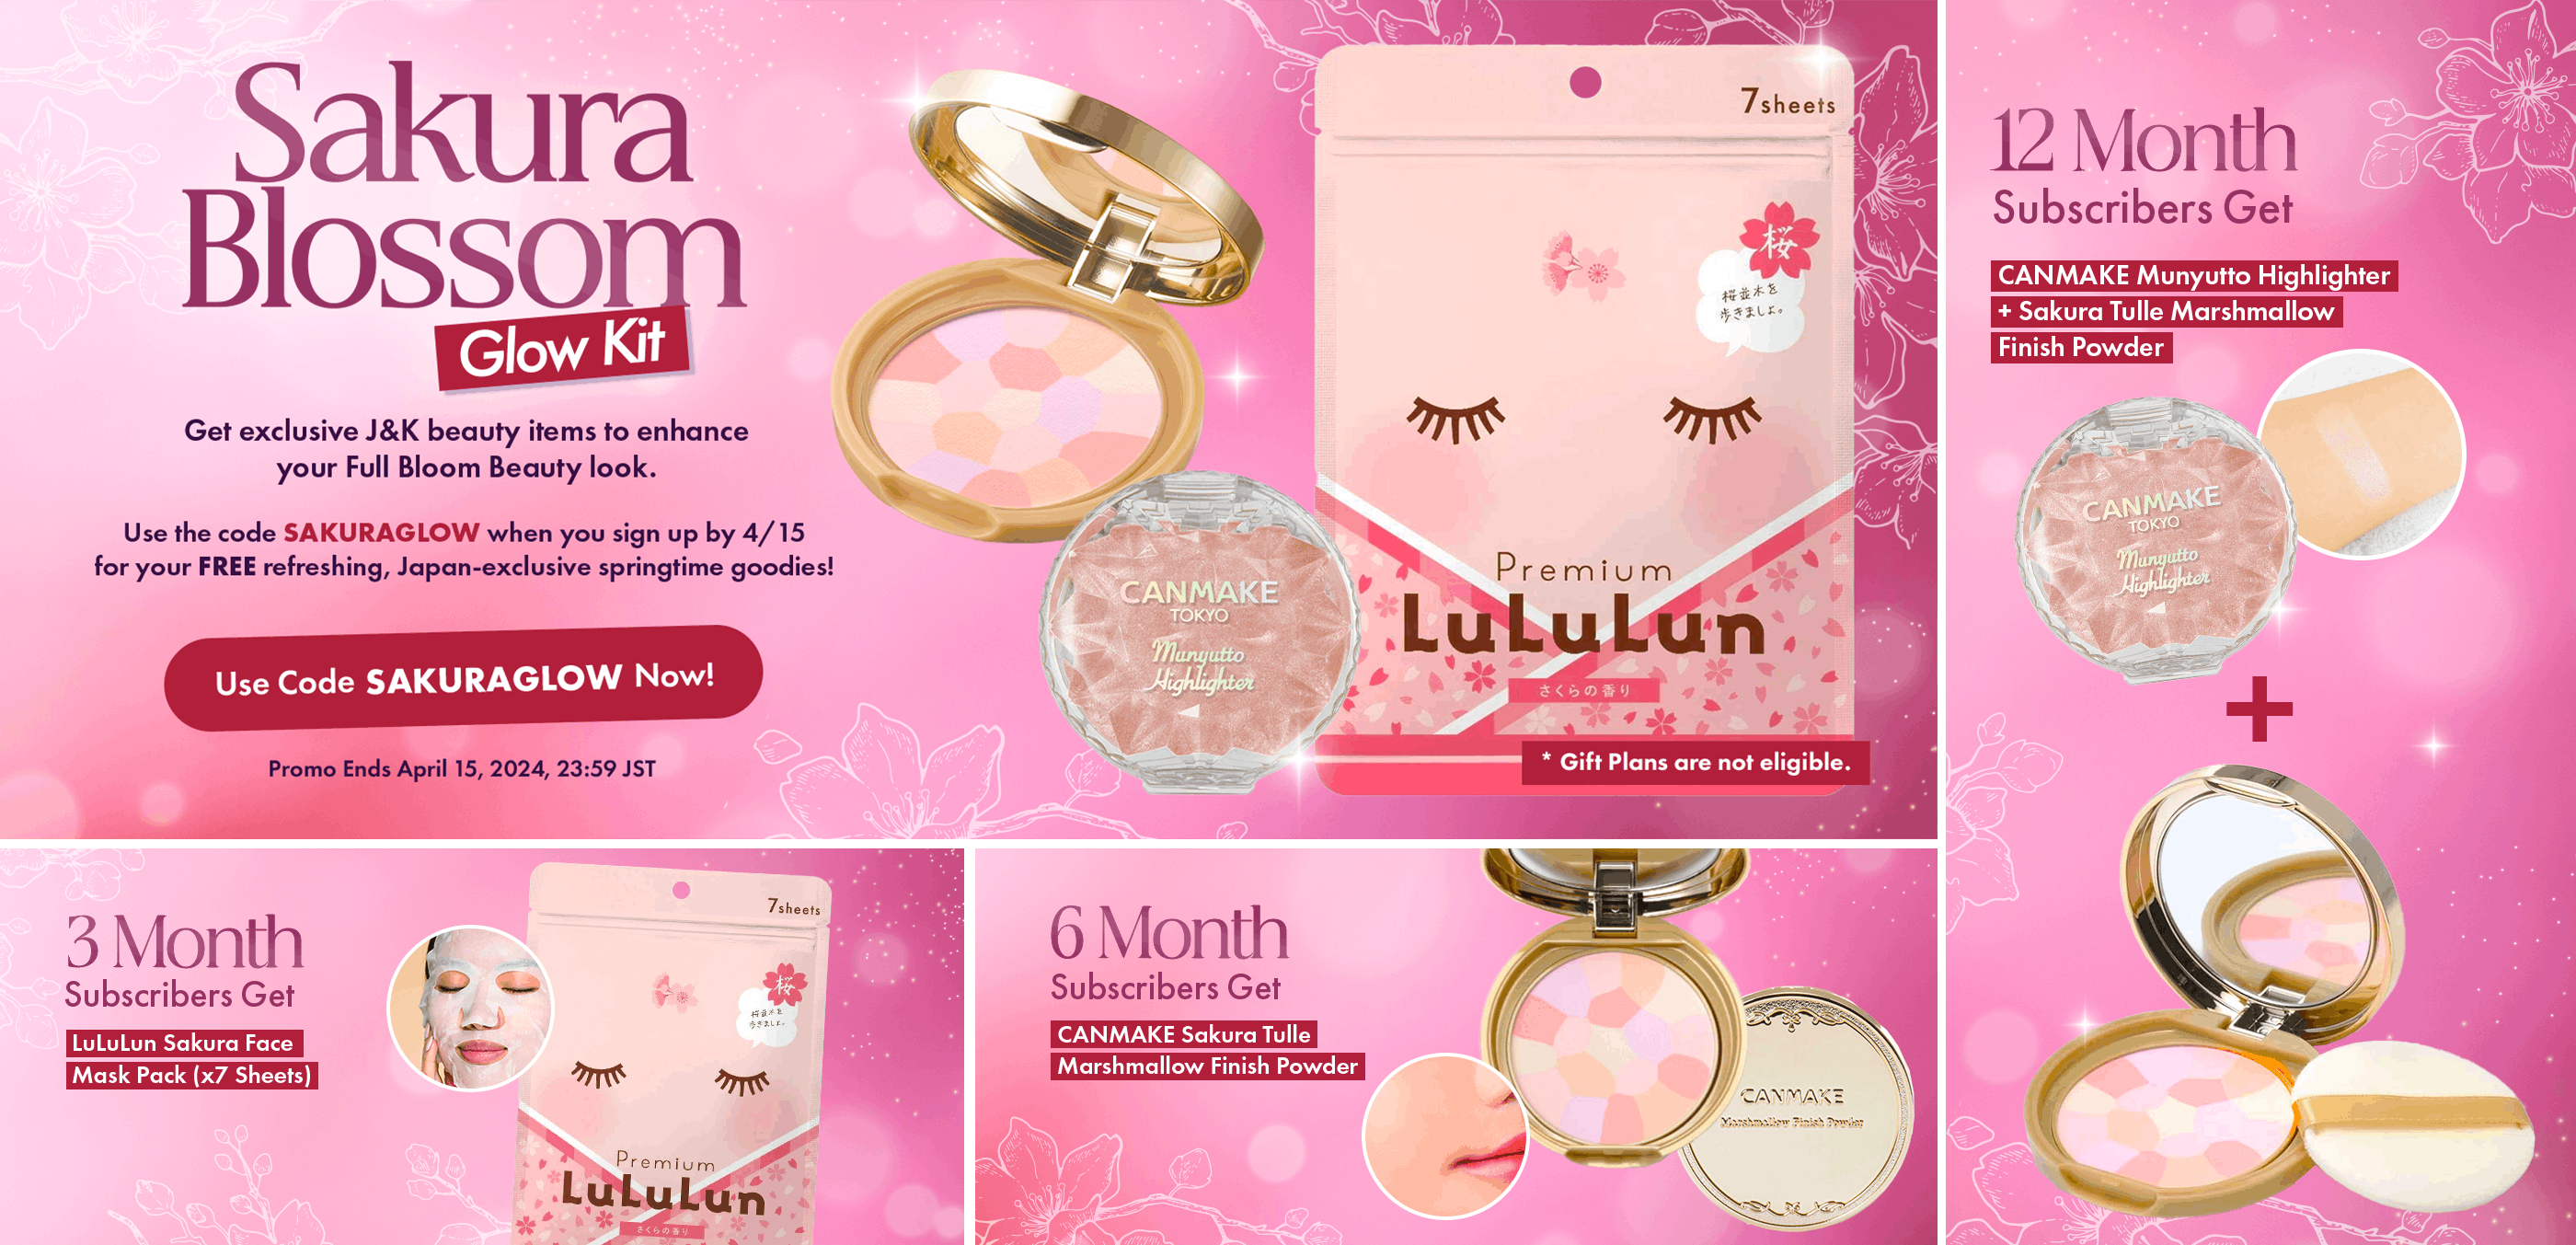 nomakenolife use the code SAKURAGOW when you sign up by 4/15 for your FREE Sakura Blossom Glow Kit items!